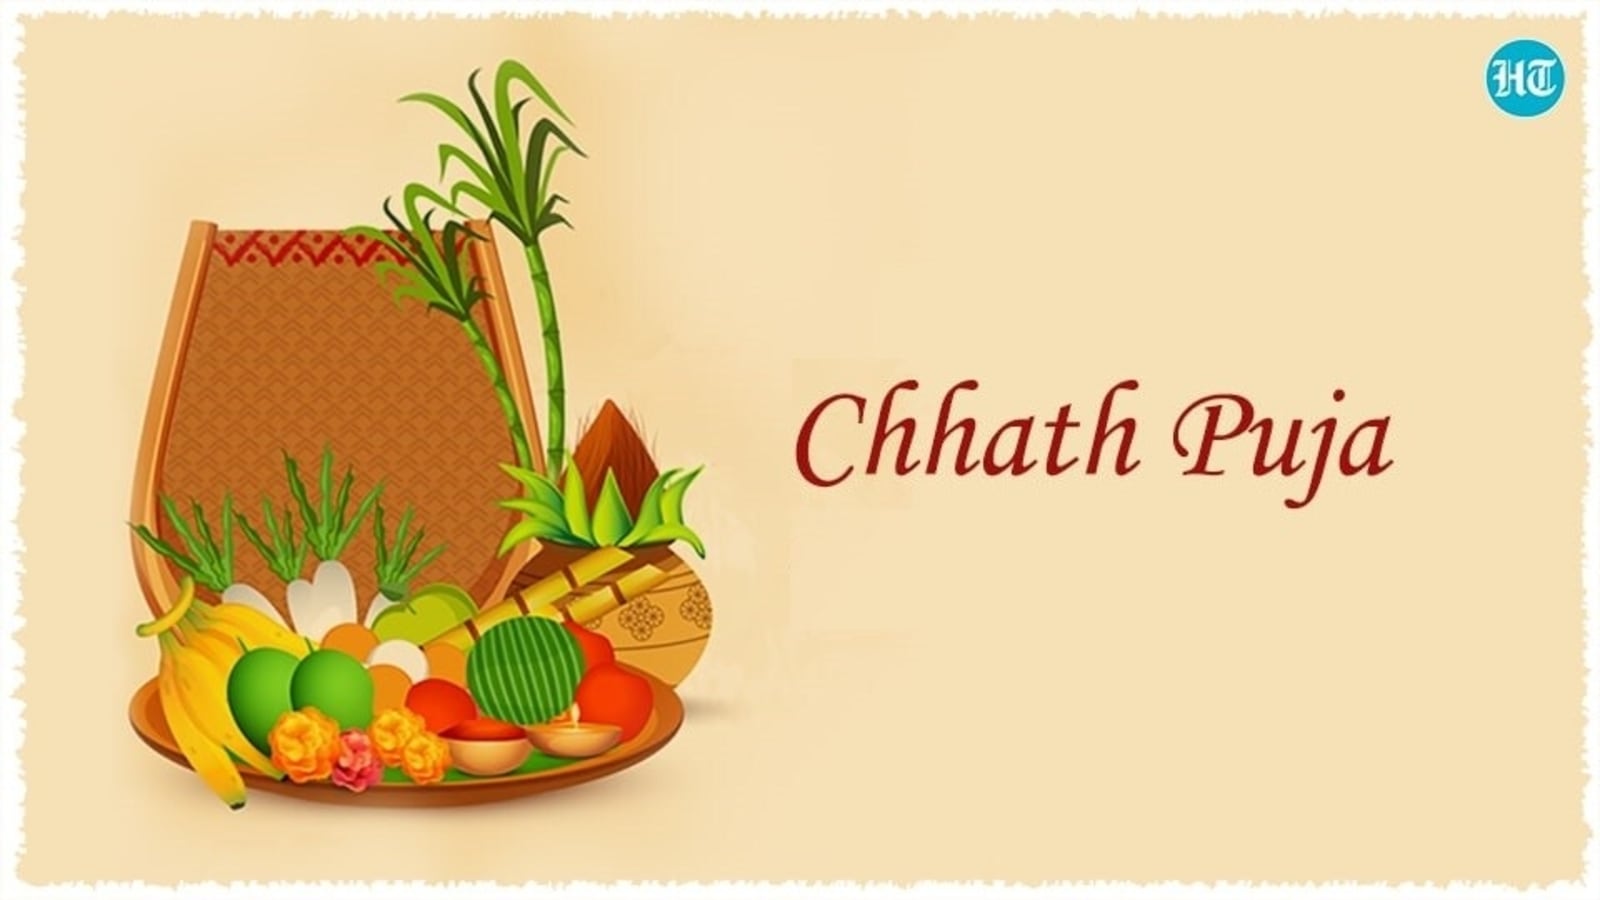 Chhath puja text png | Png text, Editing background, Green screen  background images